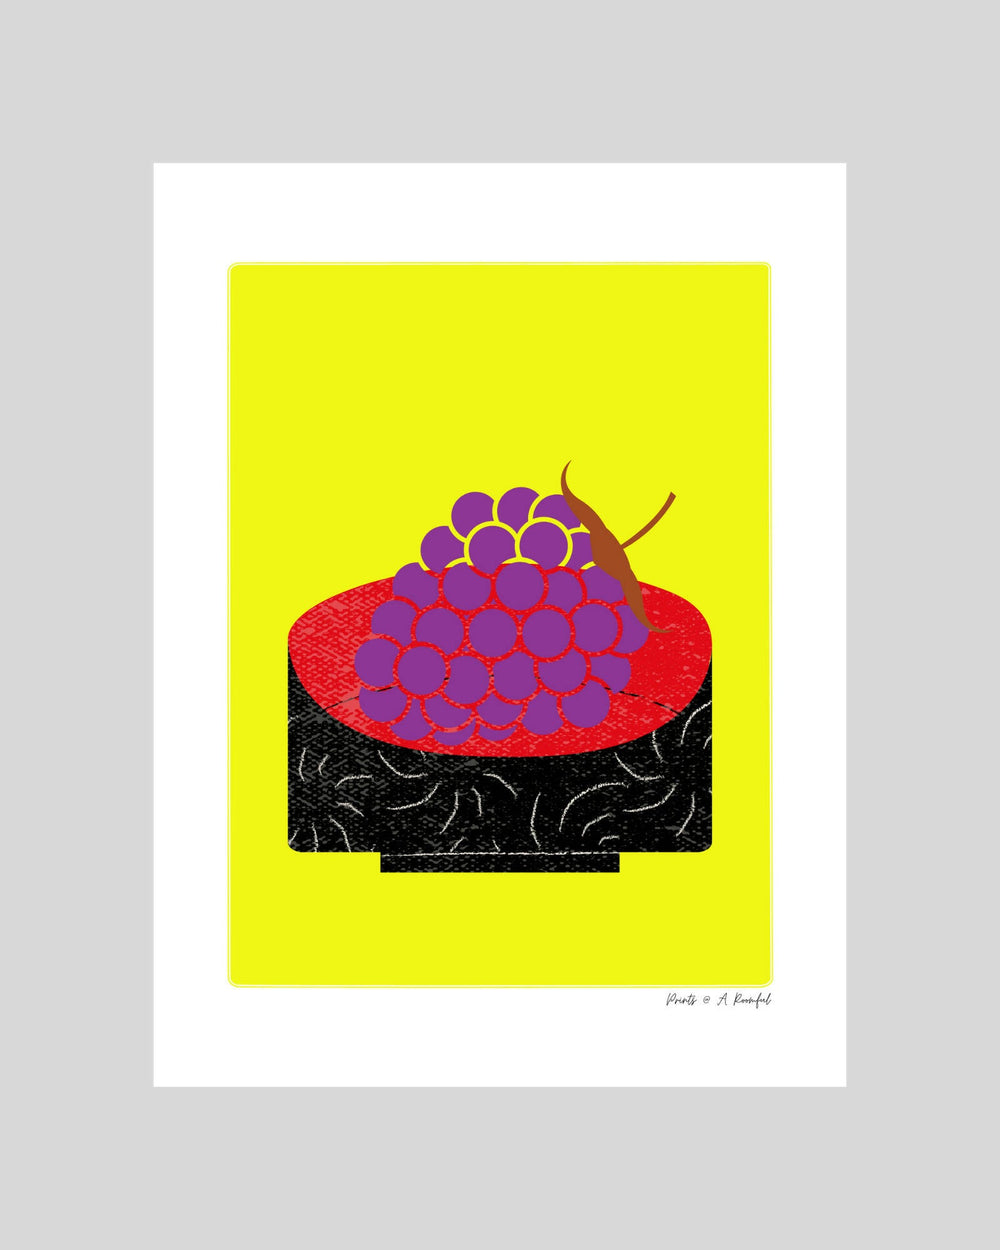 wall art : inspired by colours and fruits (grapes) Art Prints@ARoomful 